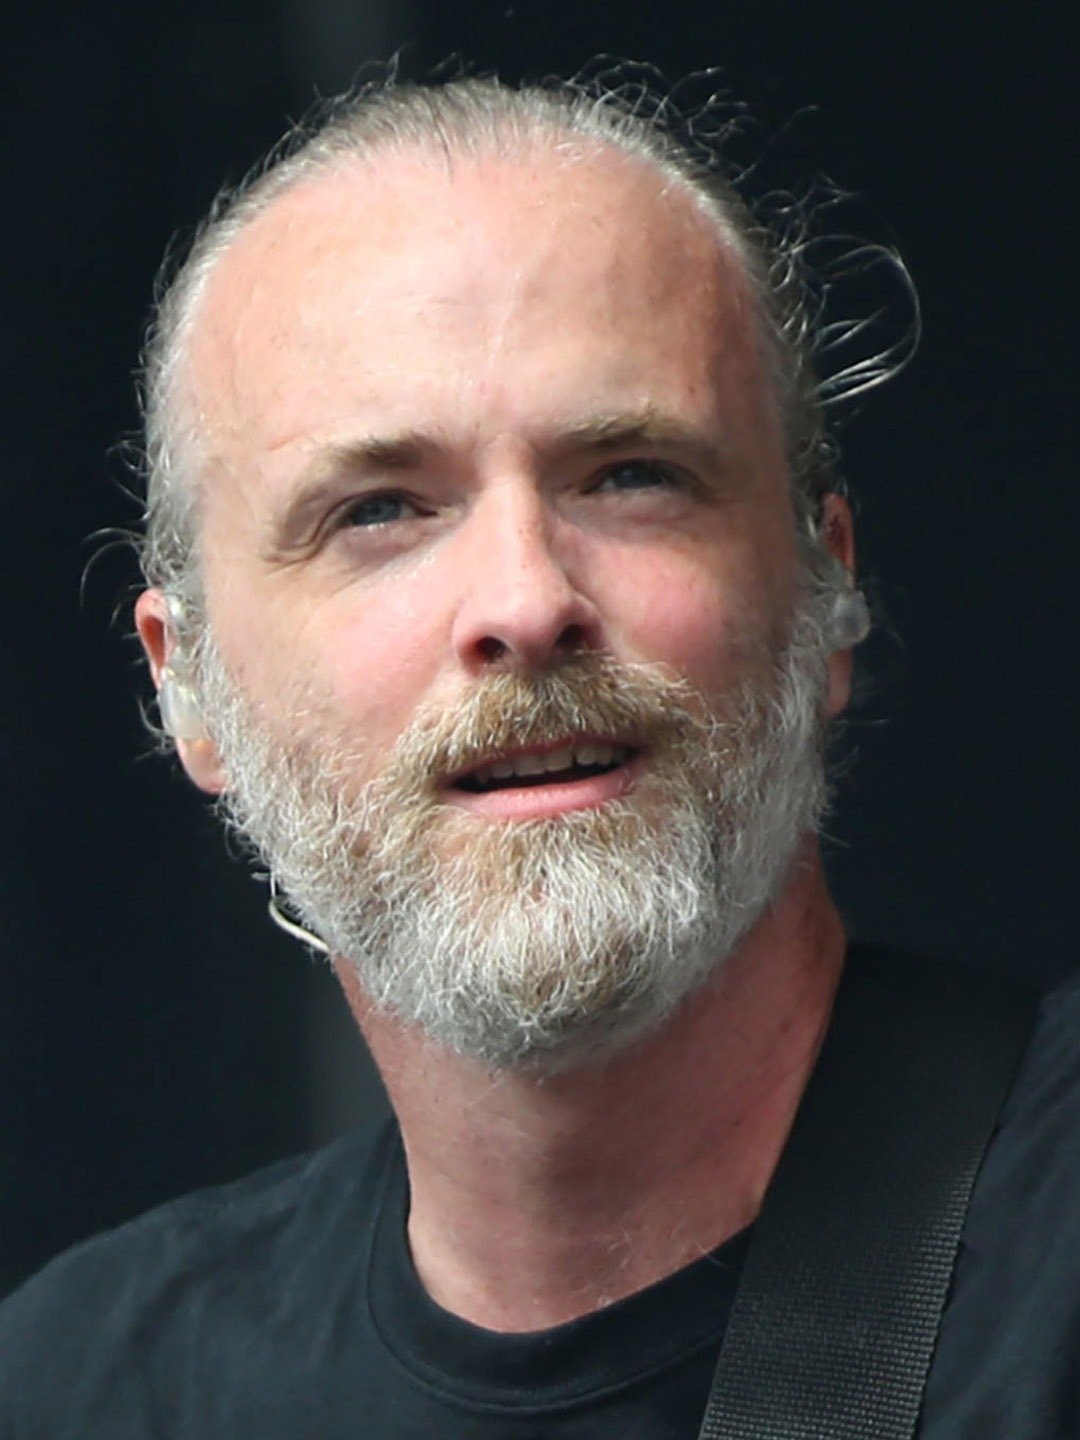 How tall is Fran Healy?